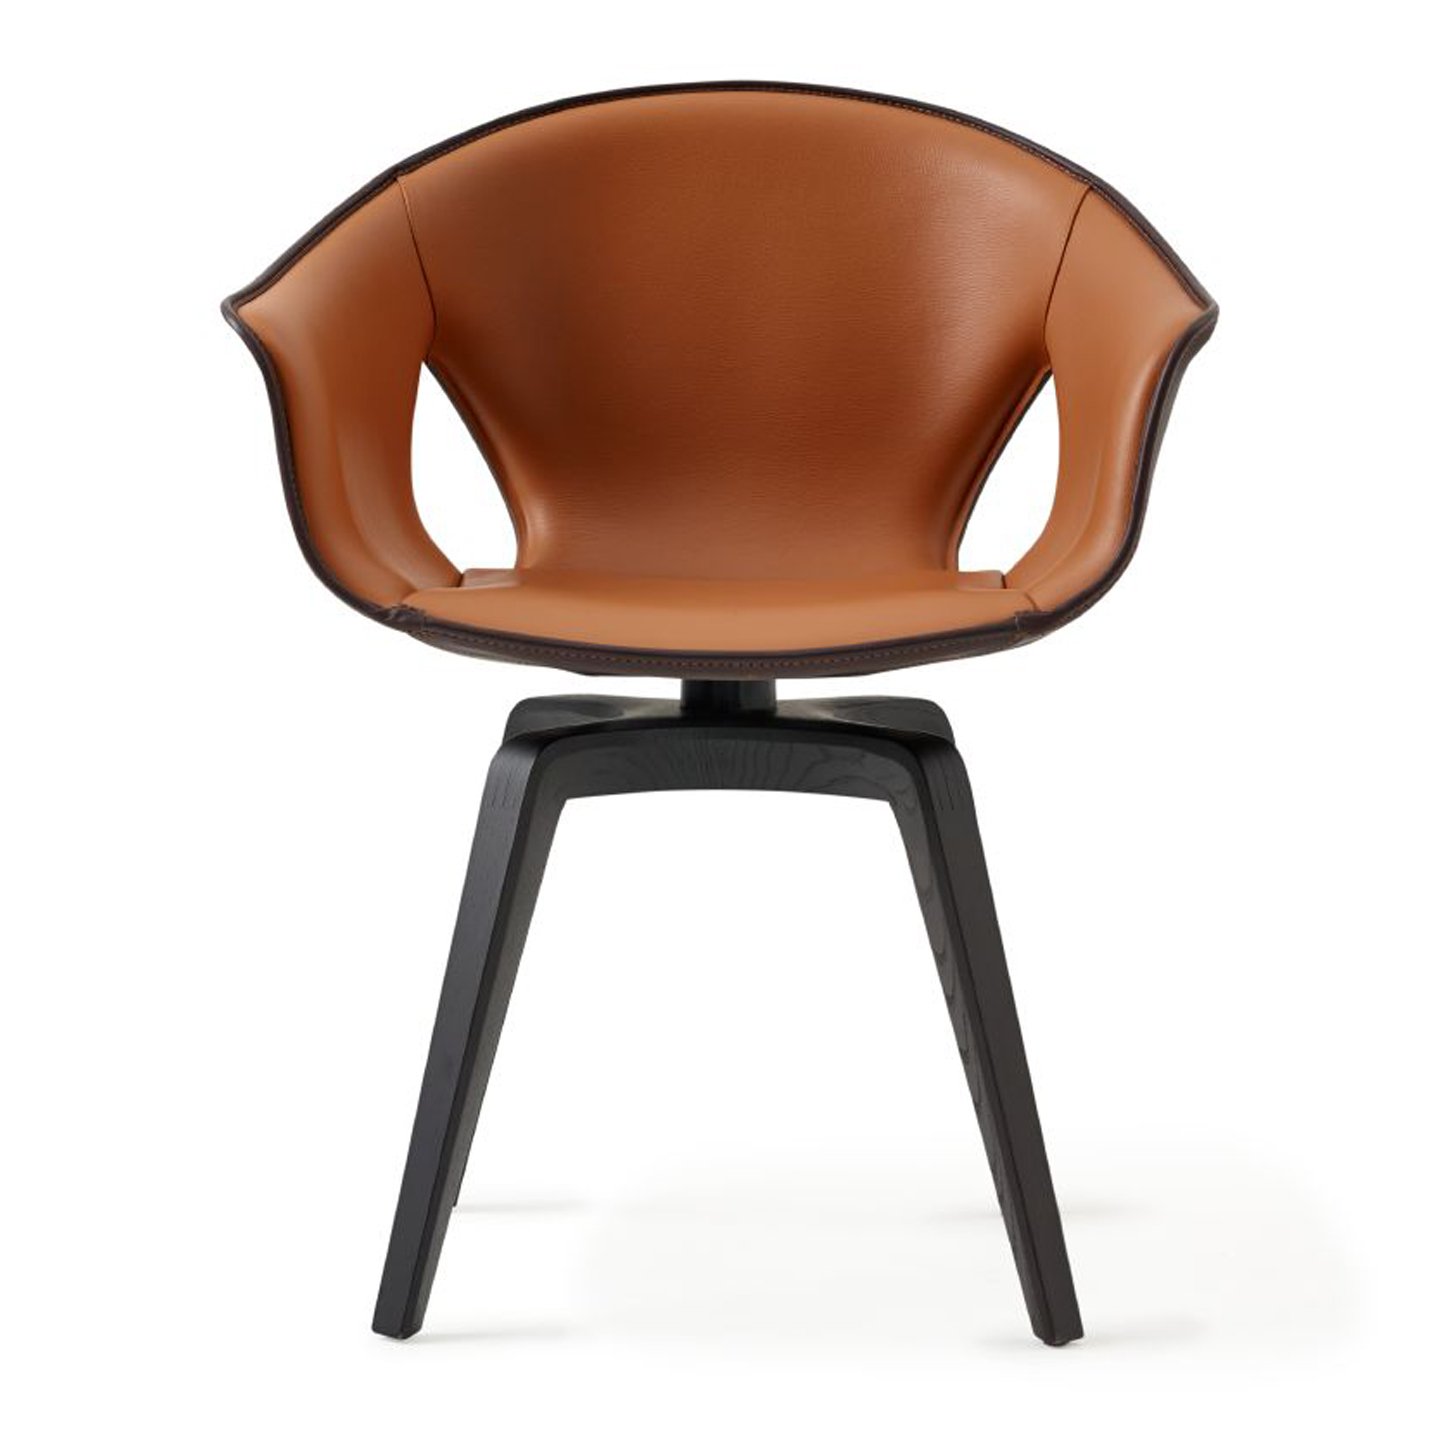 Haworth Ginger chair in orange leather and brown exterior front view